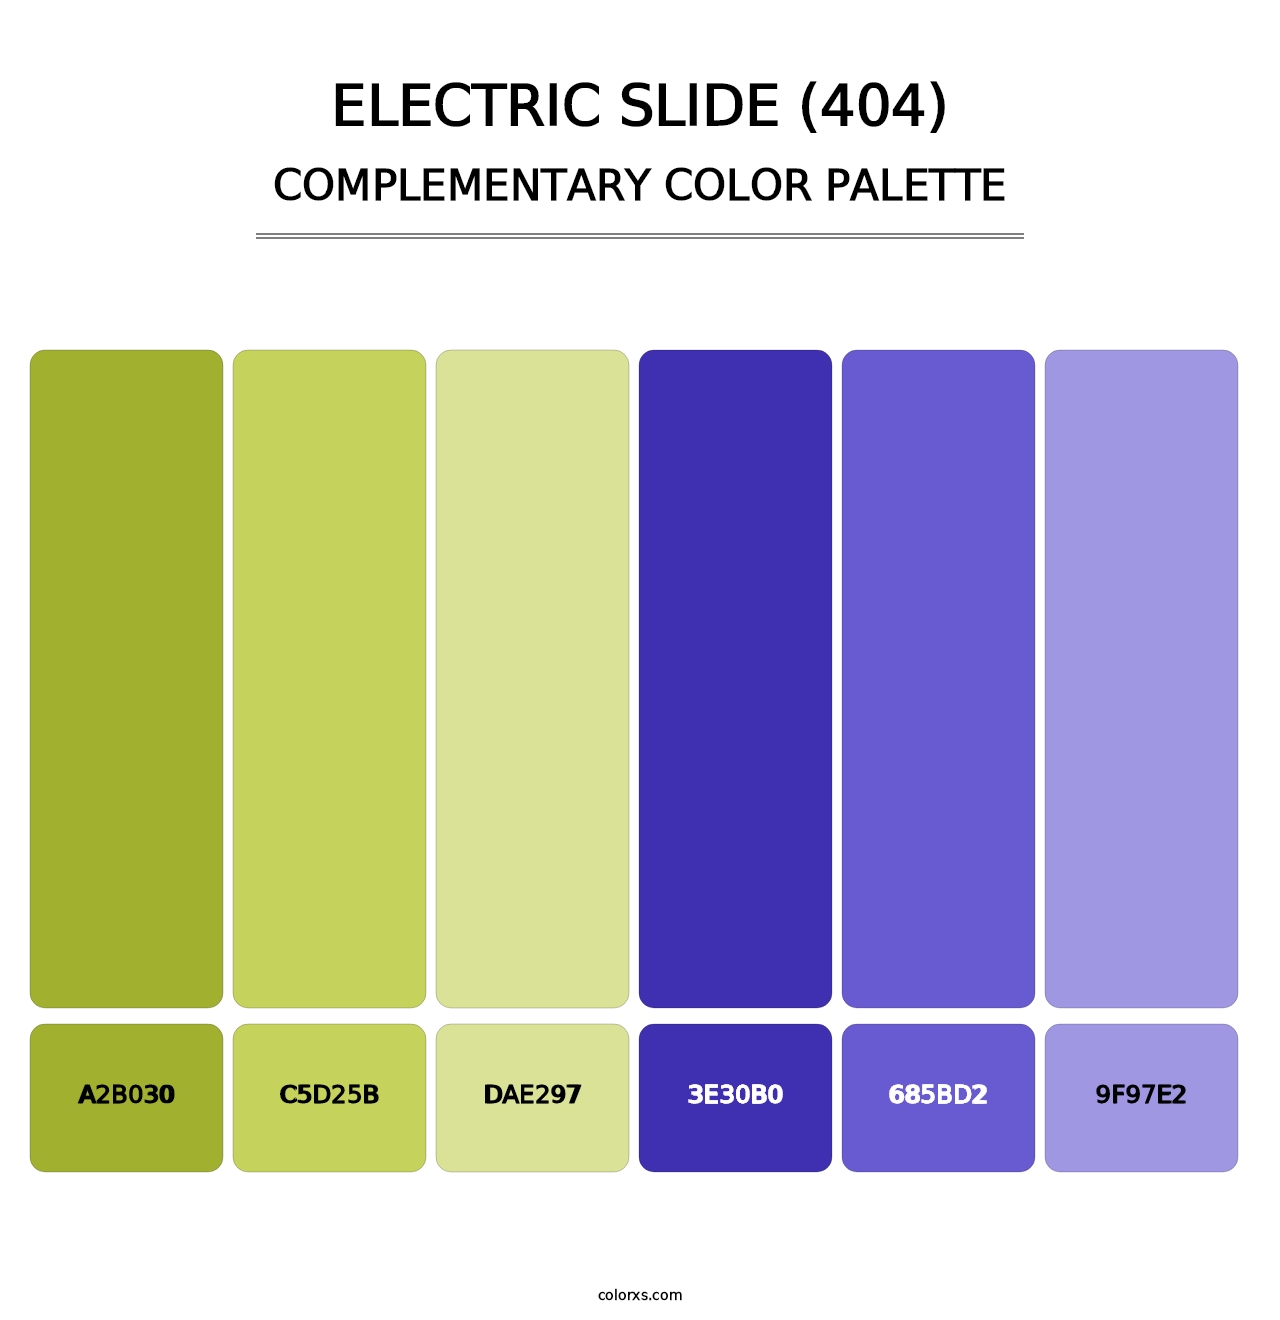 Electric Slide (404) - Complementary Color Palette